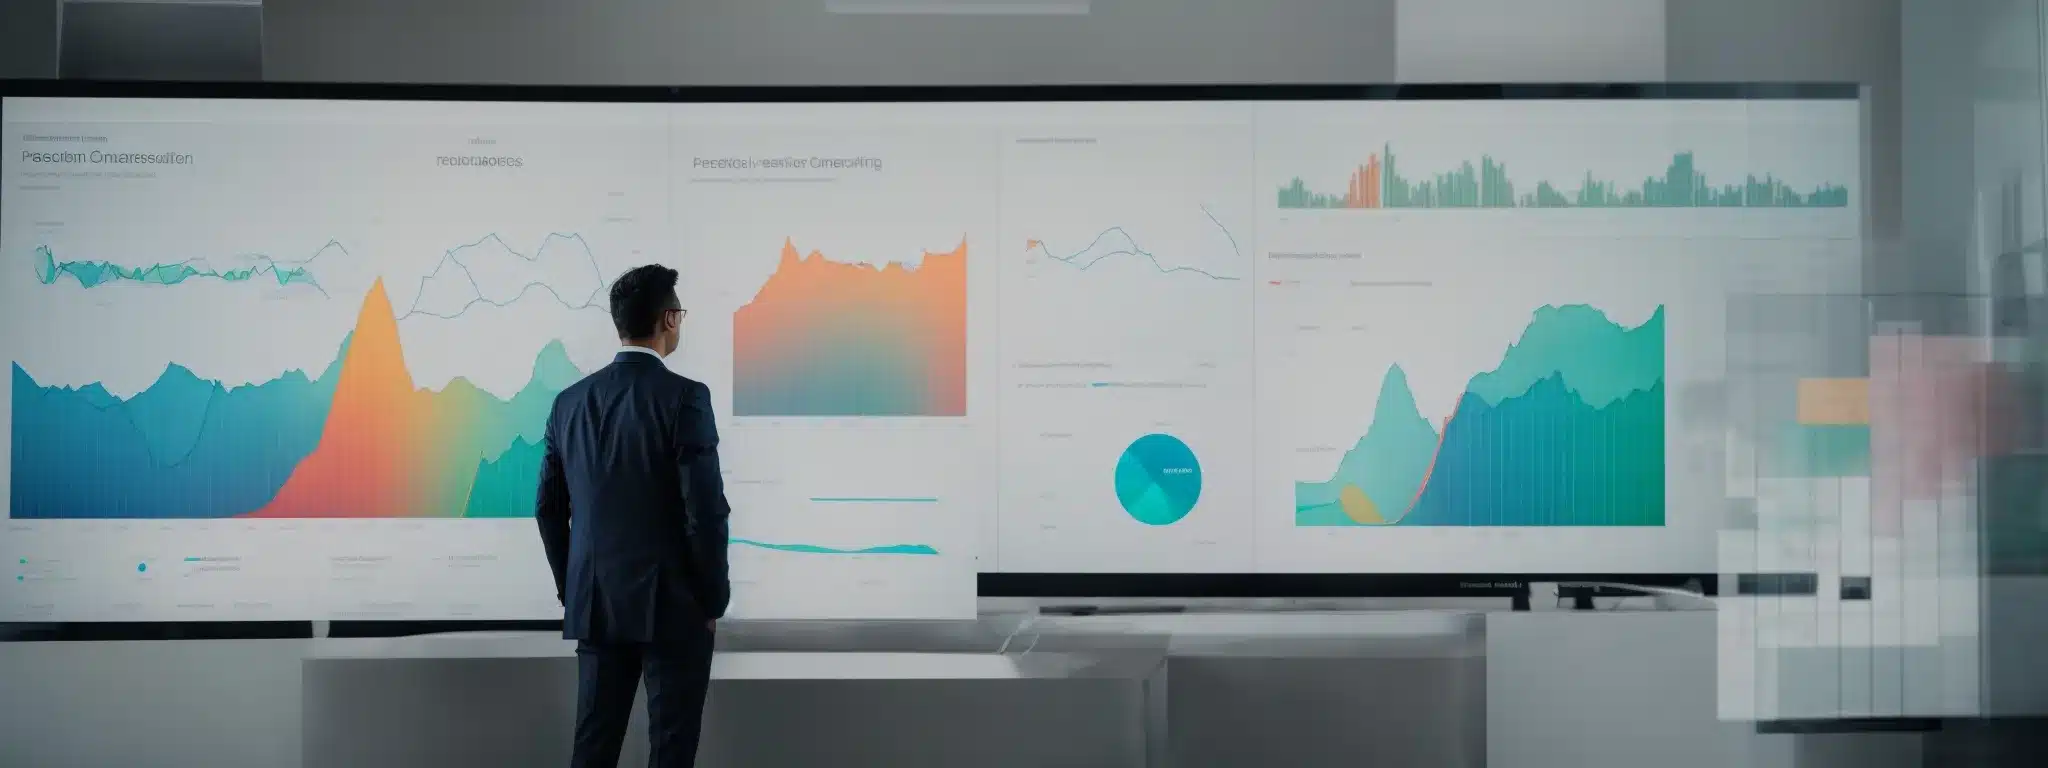 A Person Standing Before A Large Interactive Dashboard, Analyzing Colorful Graphs And Charts Related To Market Research And Consumer Feedback.